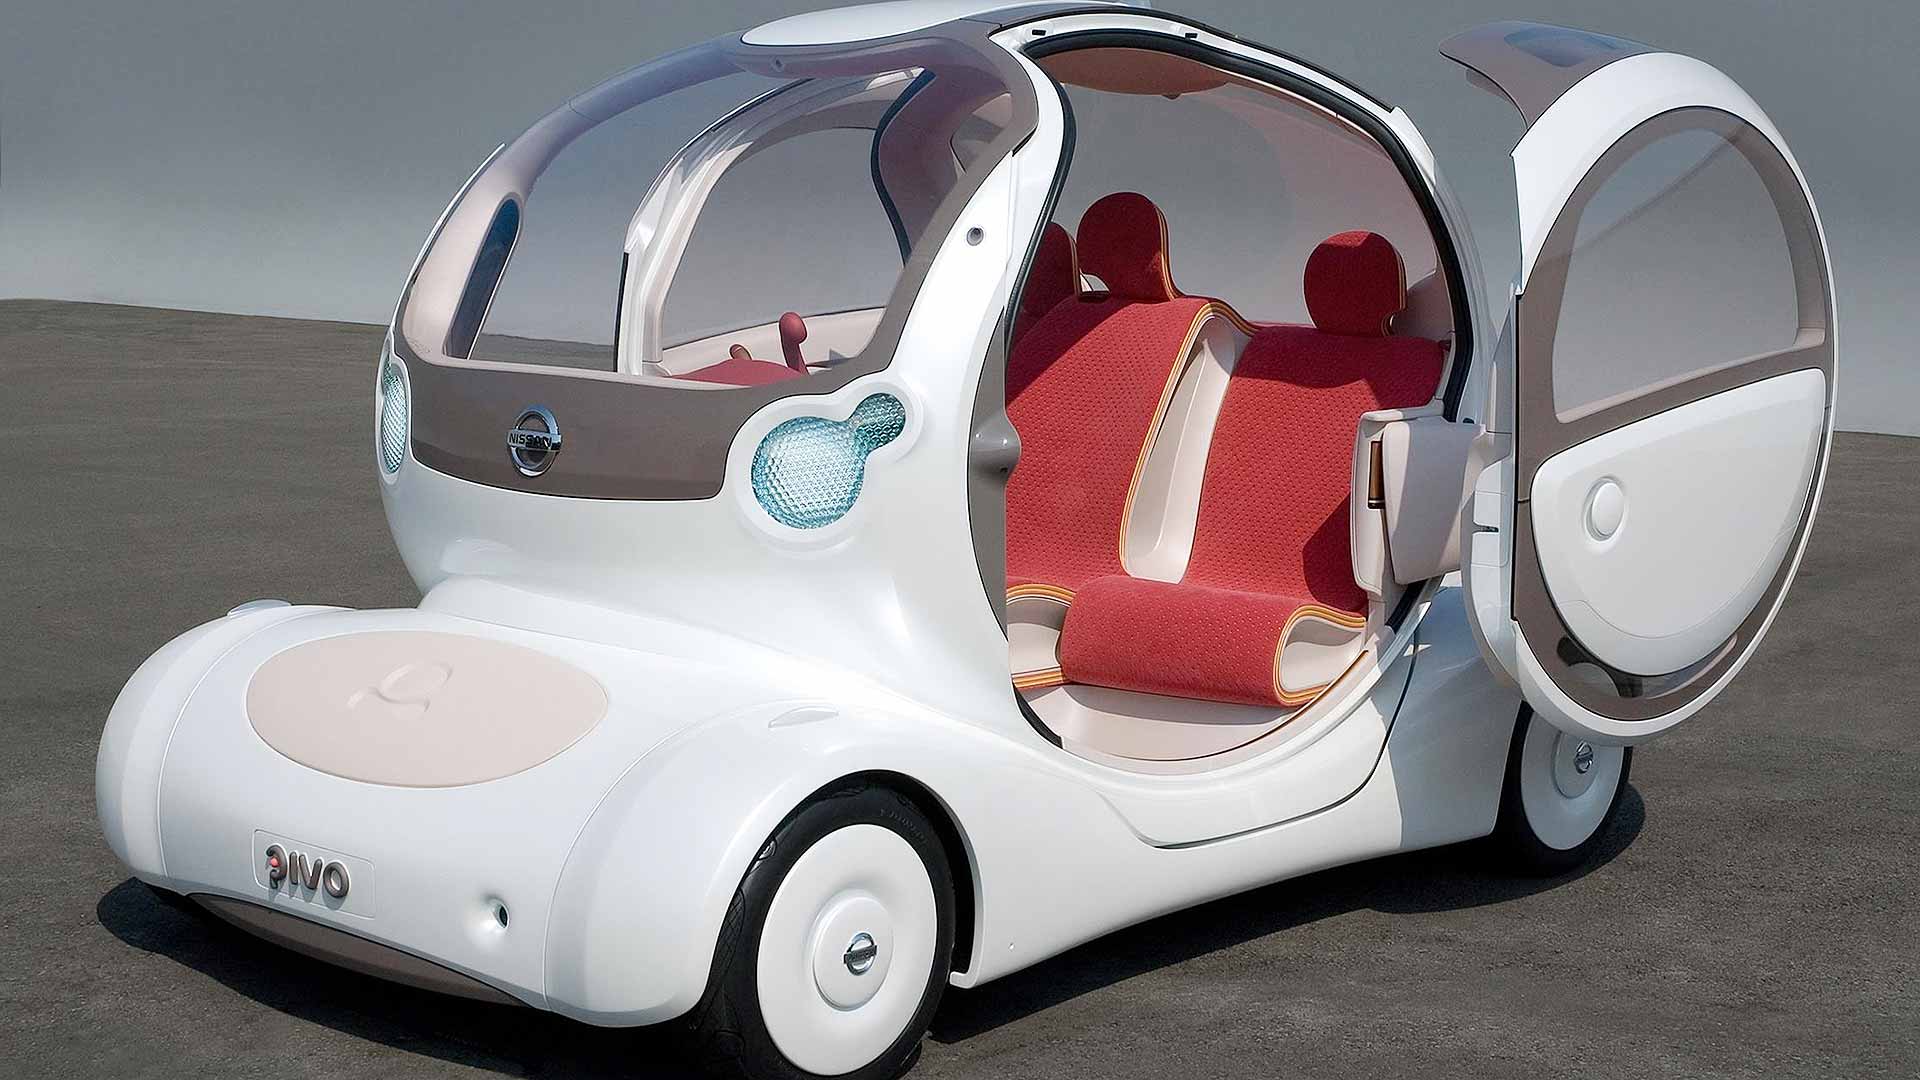 The craziest concept cars ever